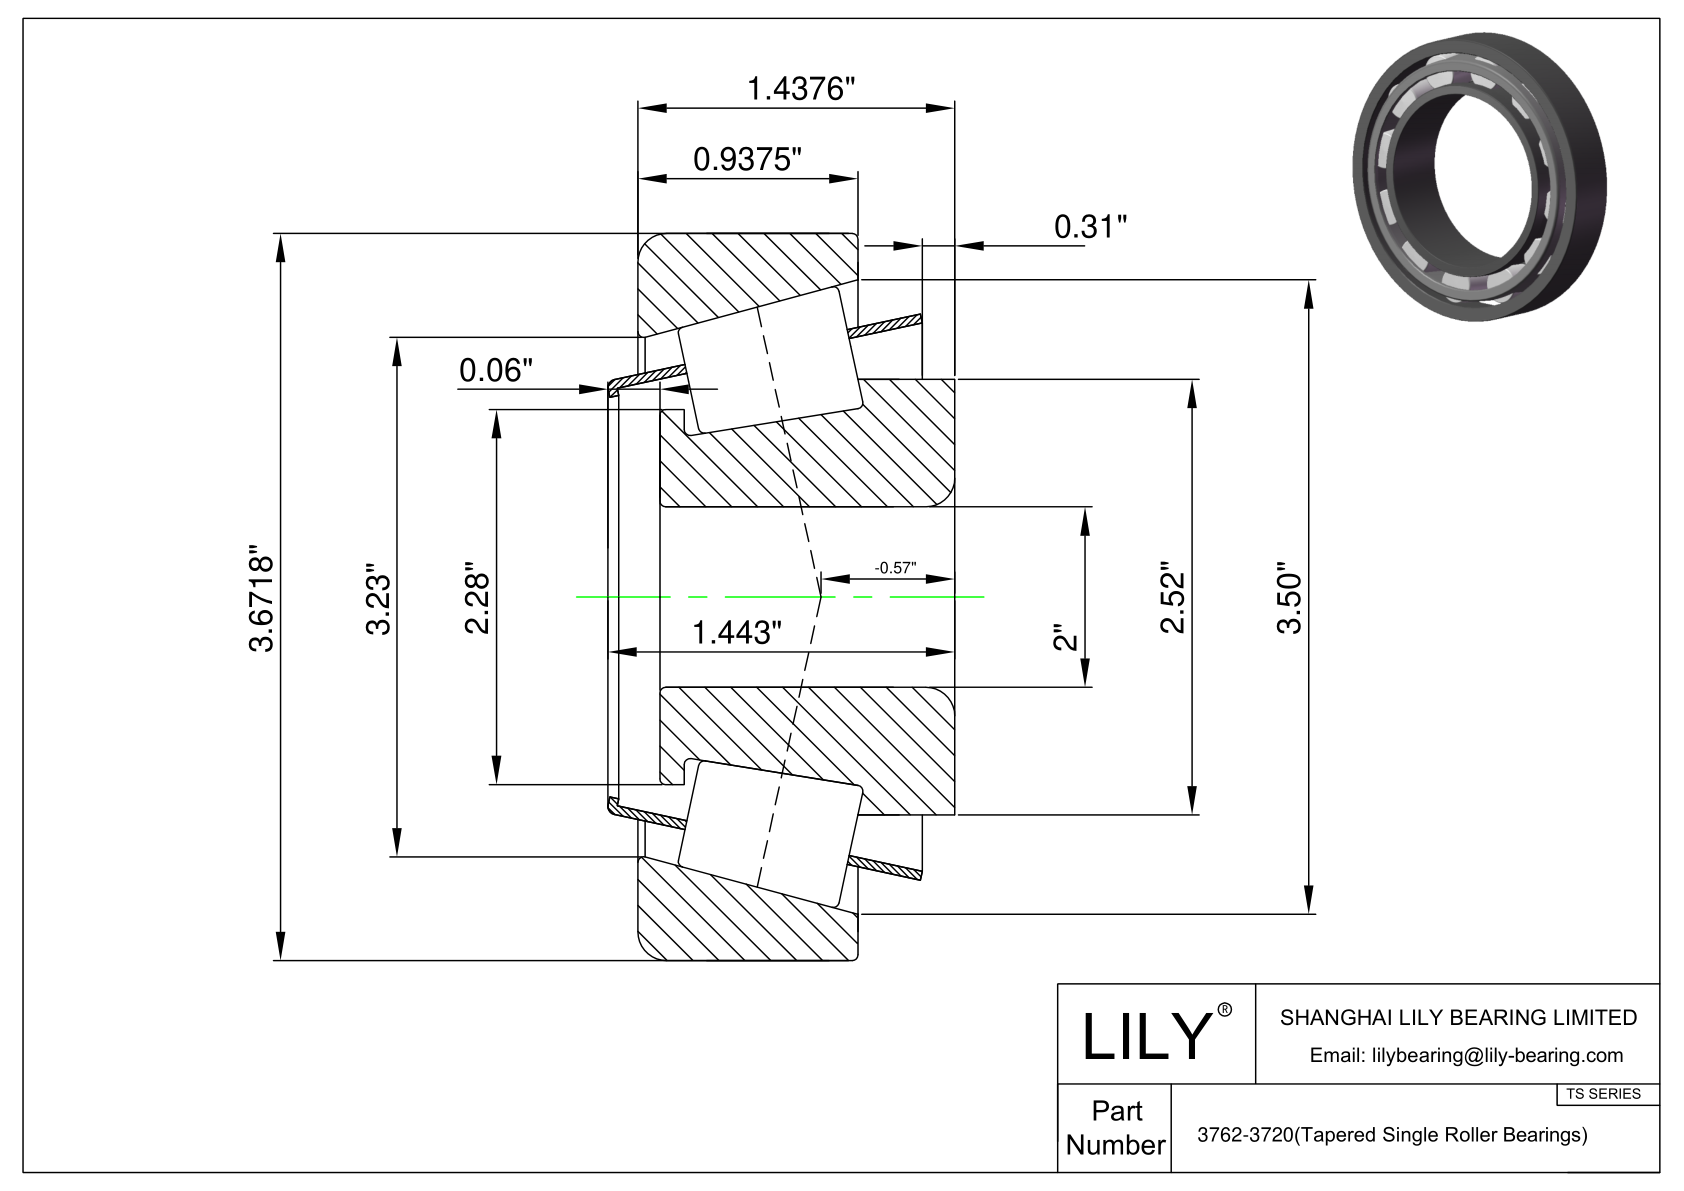 3762-3720 TS (Tapered Single Roller Bearings) (Imperial) cad drawing